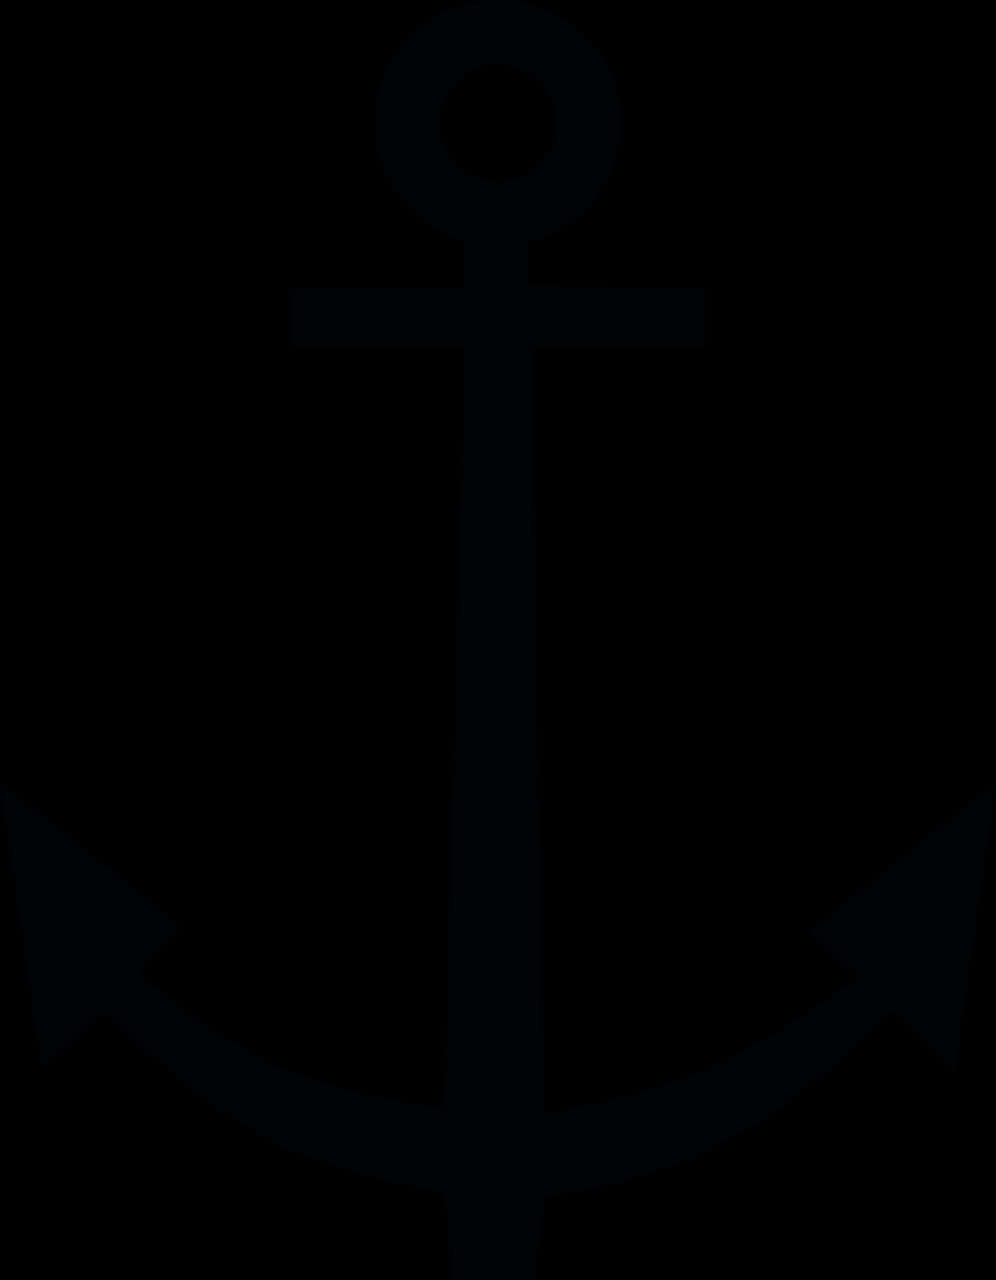 A Black Anchor With A Black Background